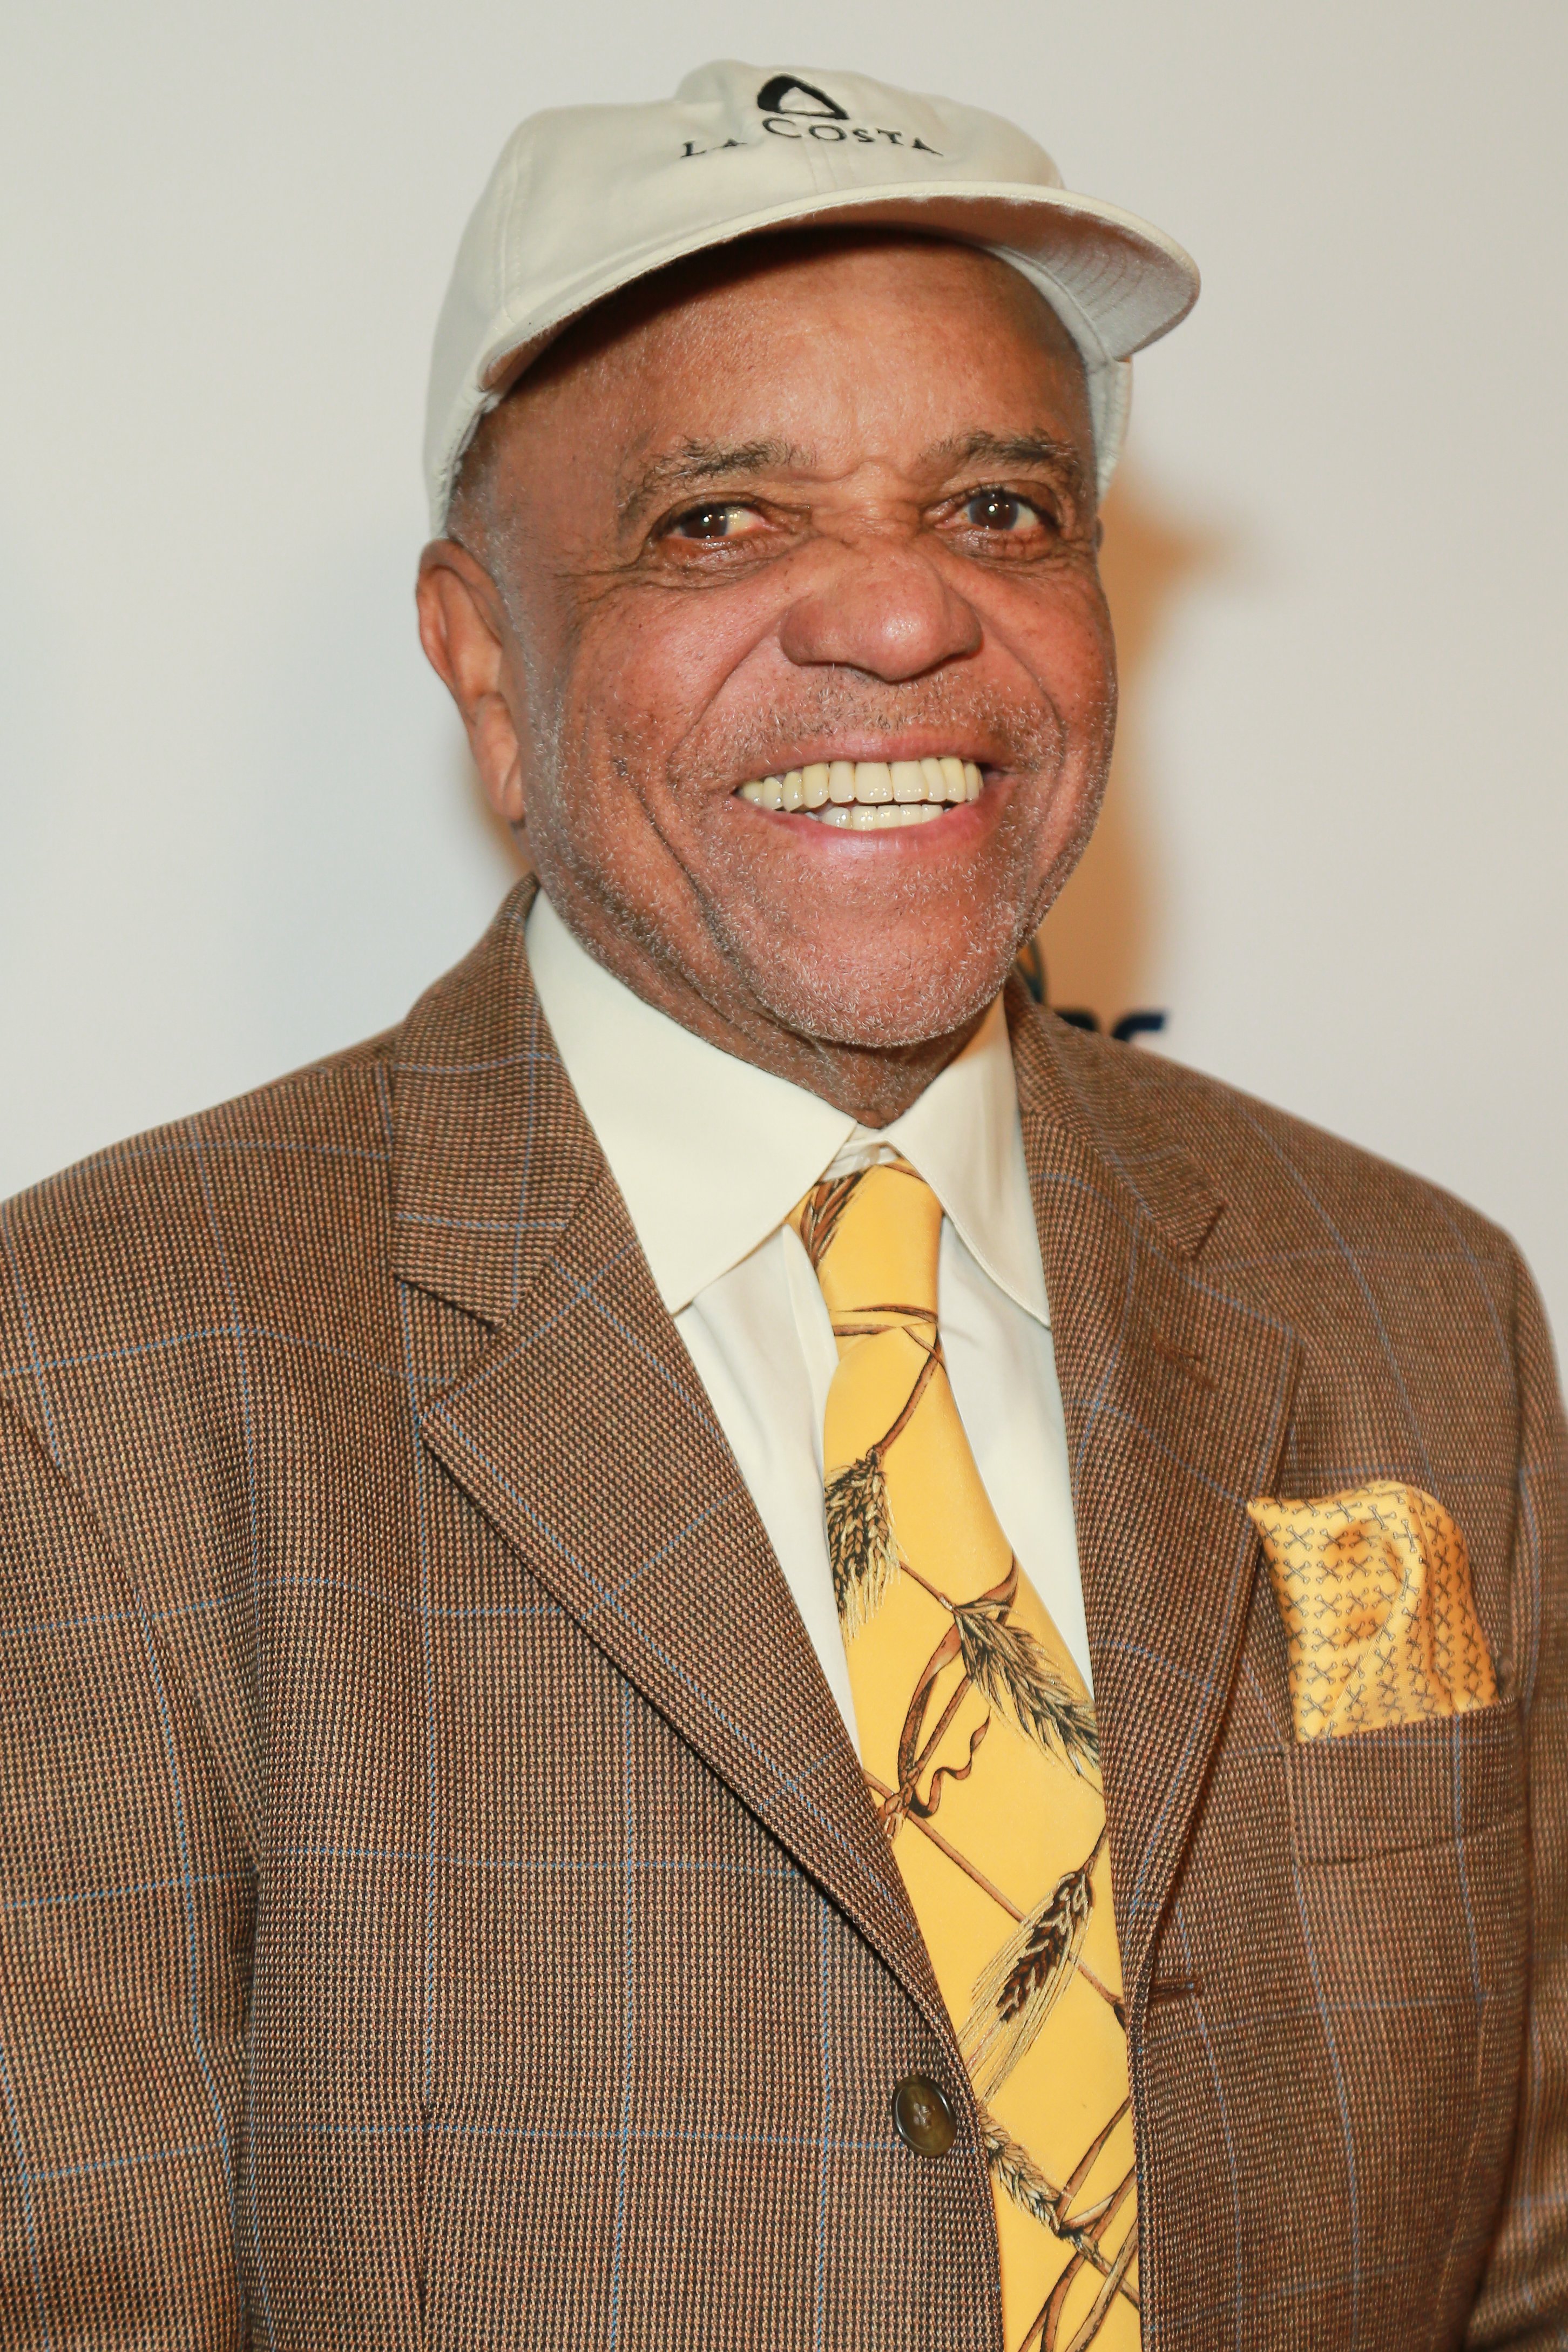 Motown founder Berry Gordy at a fundraising celebration in Beverly Hills in November 2018. | Photo: Getty Images